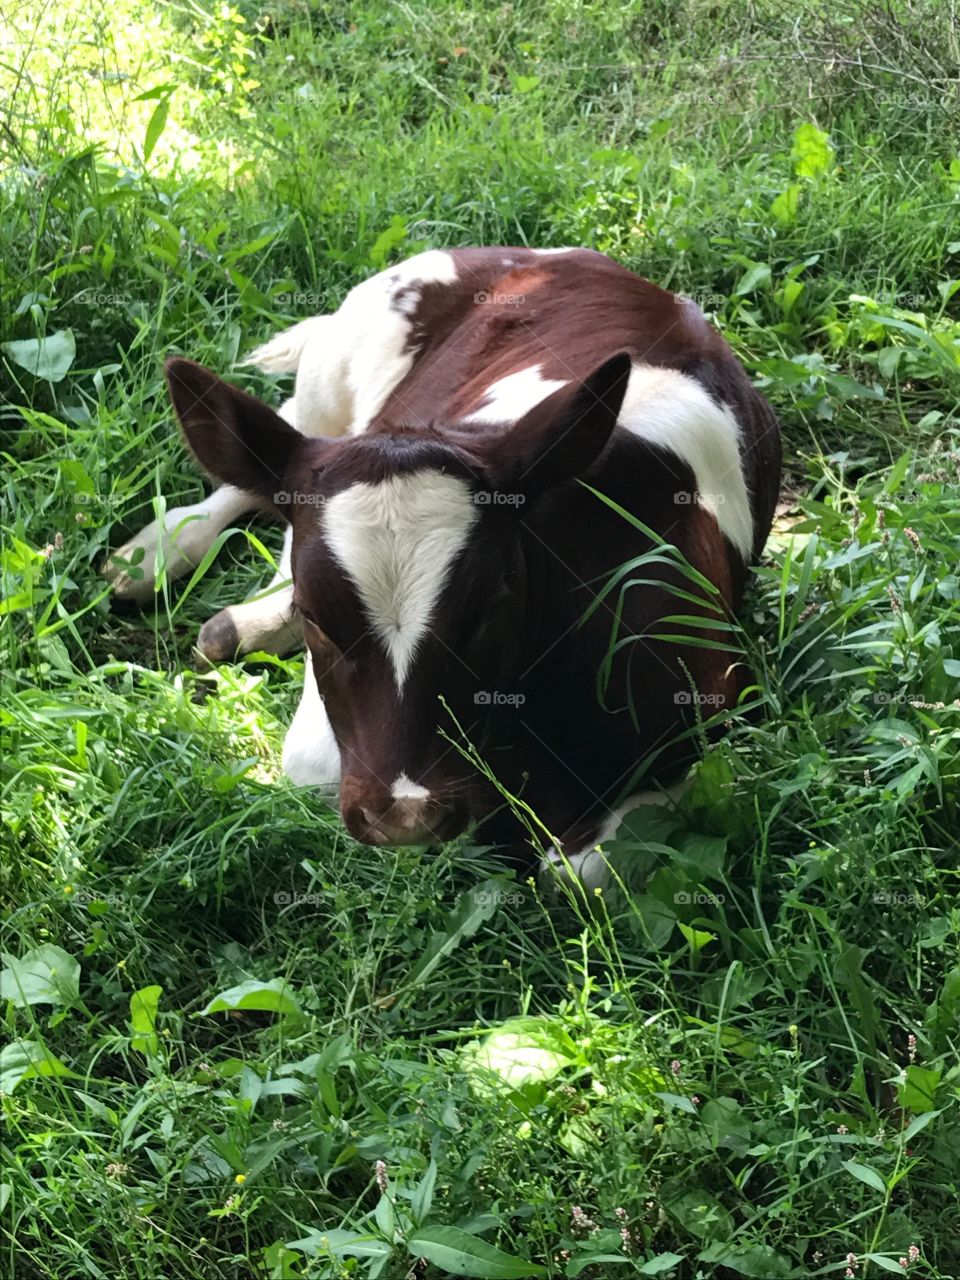 Super Sweet Brown and White Baby Cow - Calf Lying in Peaceful Green Grass Pasture - Sunny Day Outside on the Rustic Country Farm 